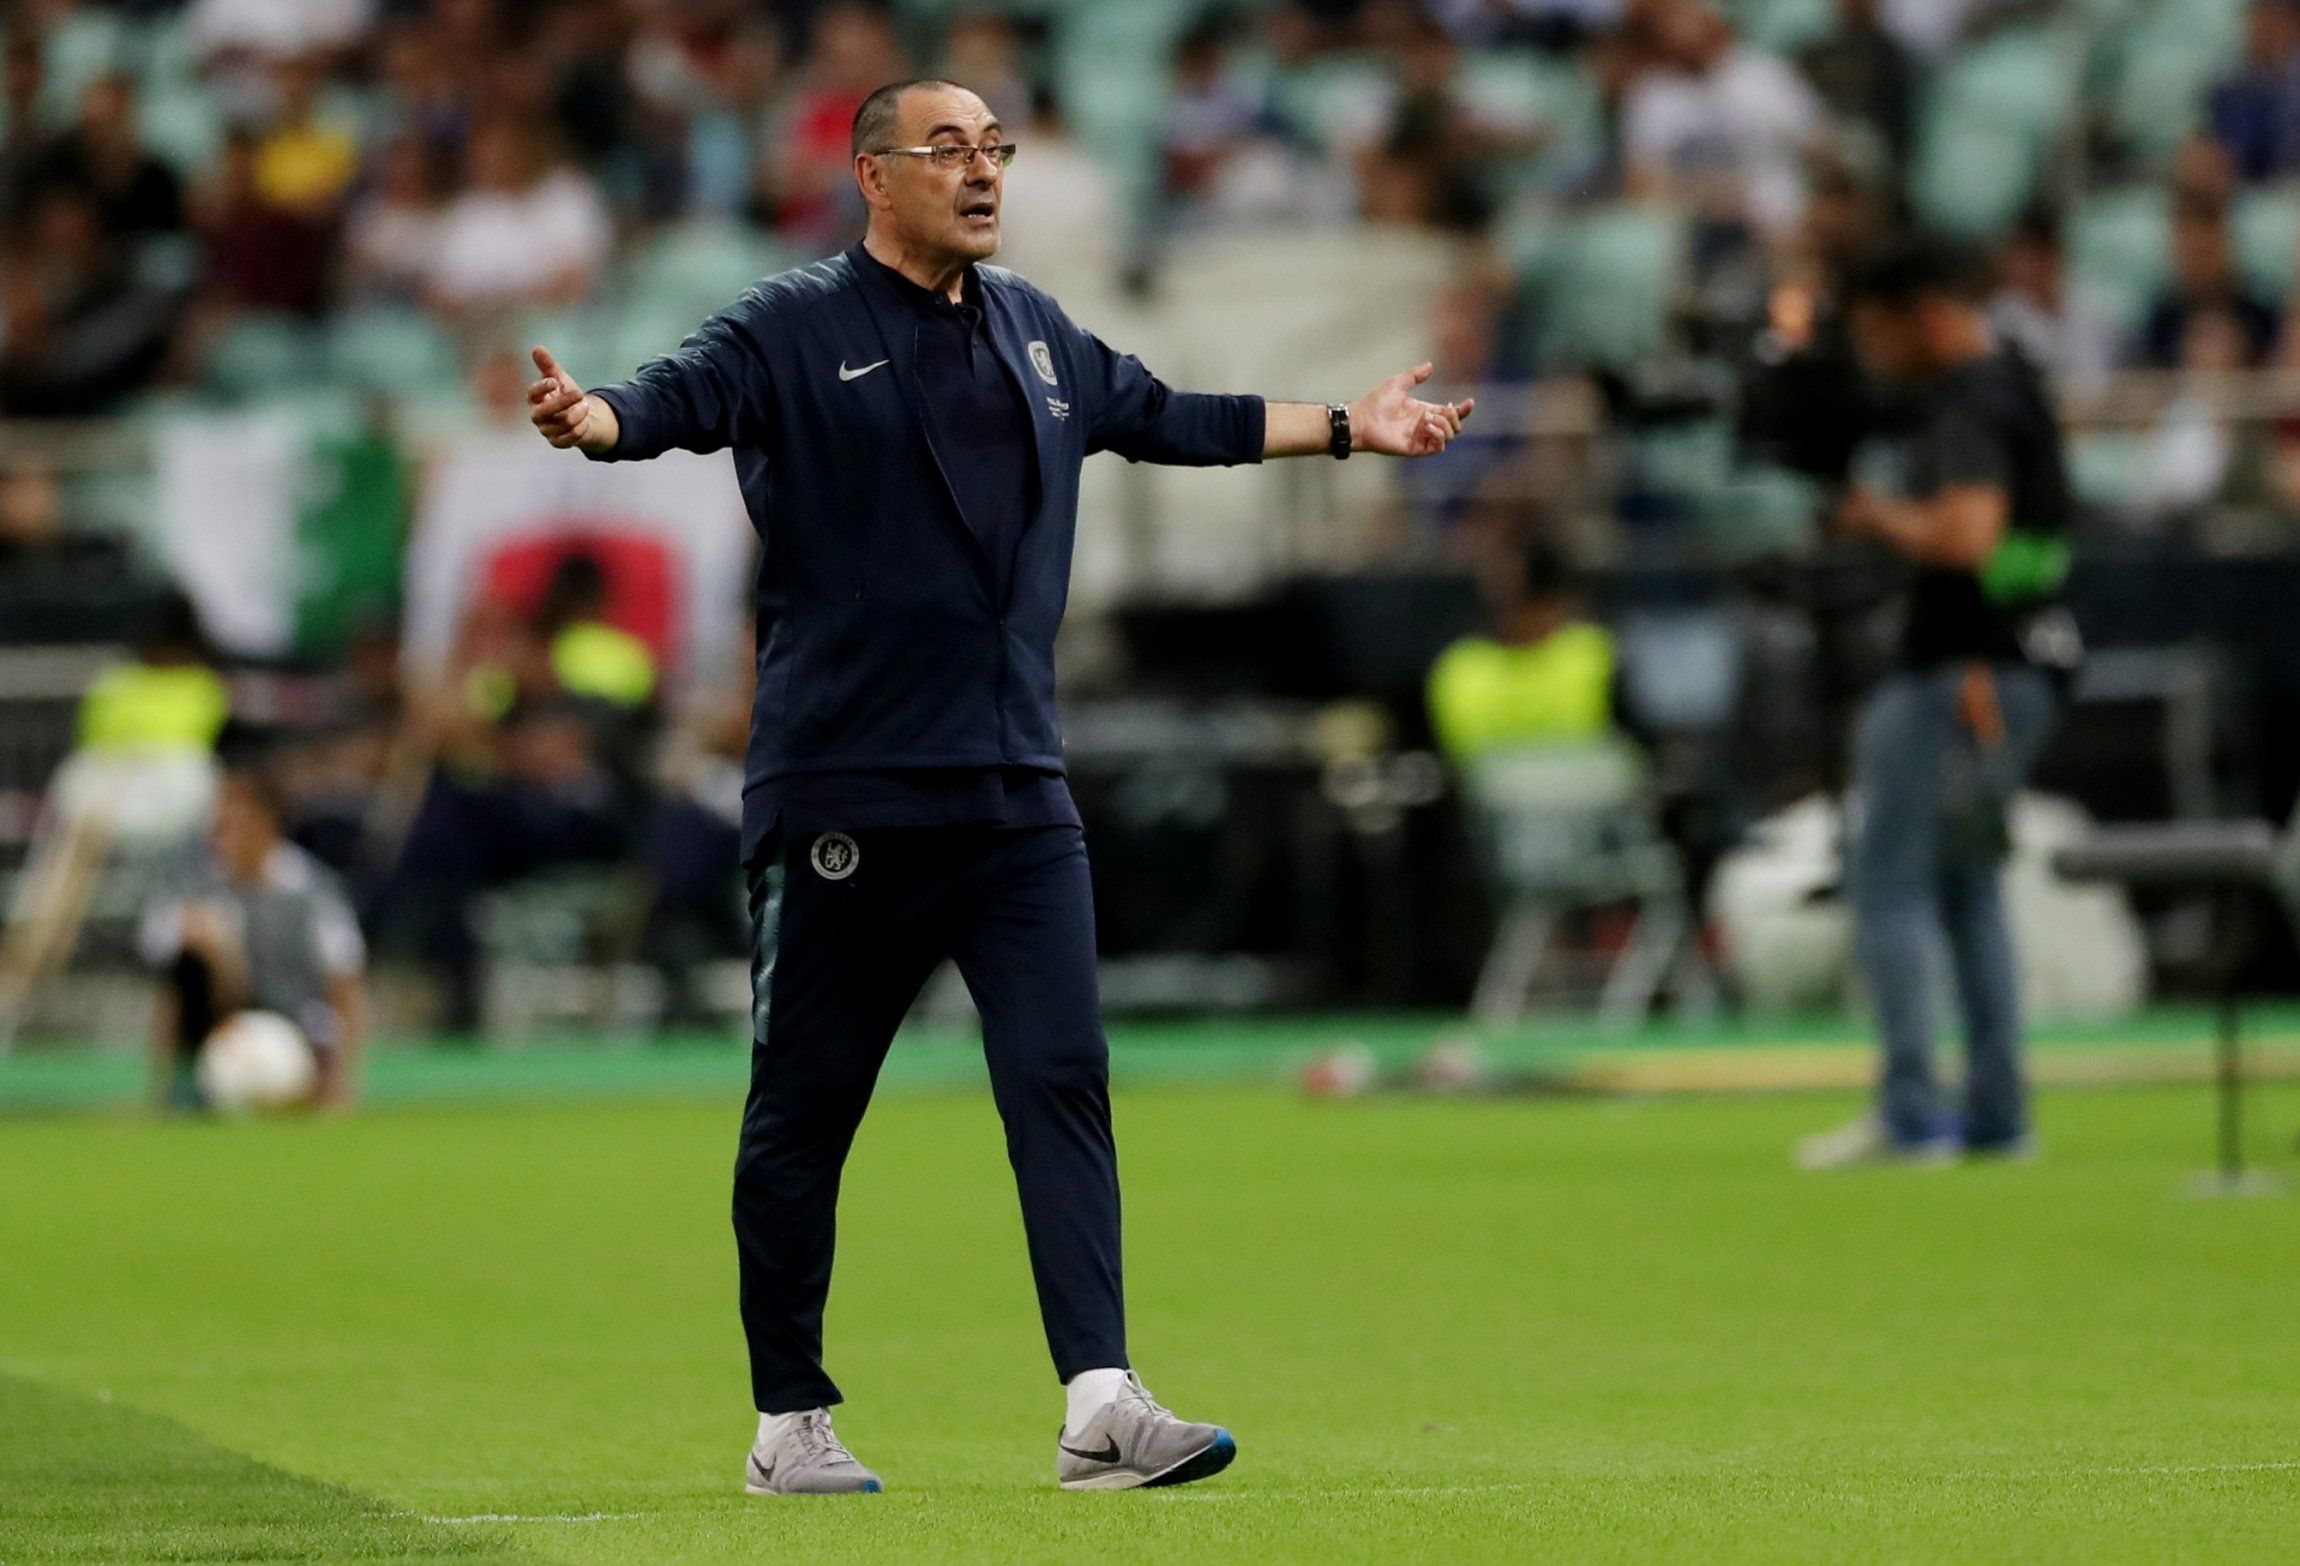 former chelsea manager maurizio sarri on sideline reacting during europa league final vs arsenal